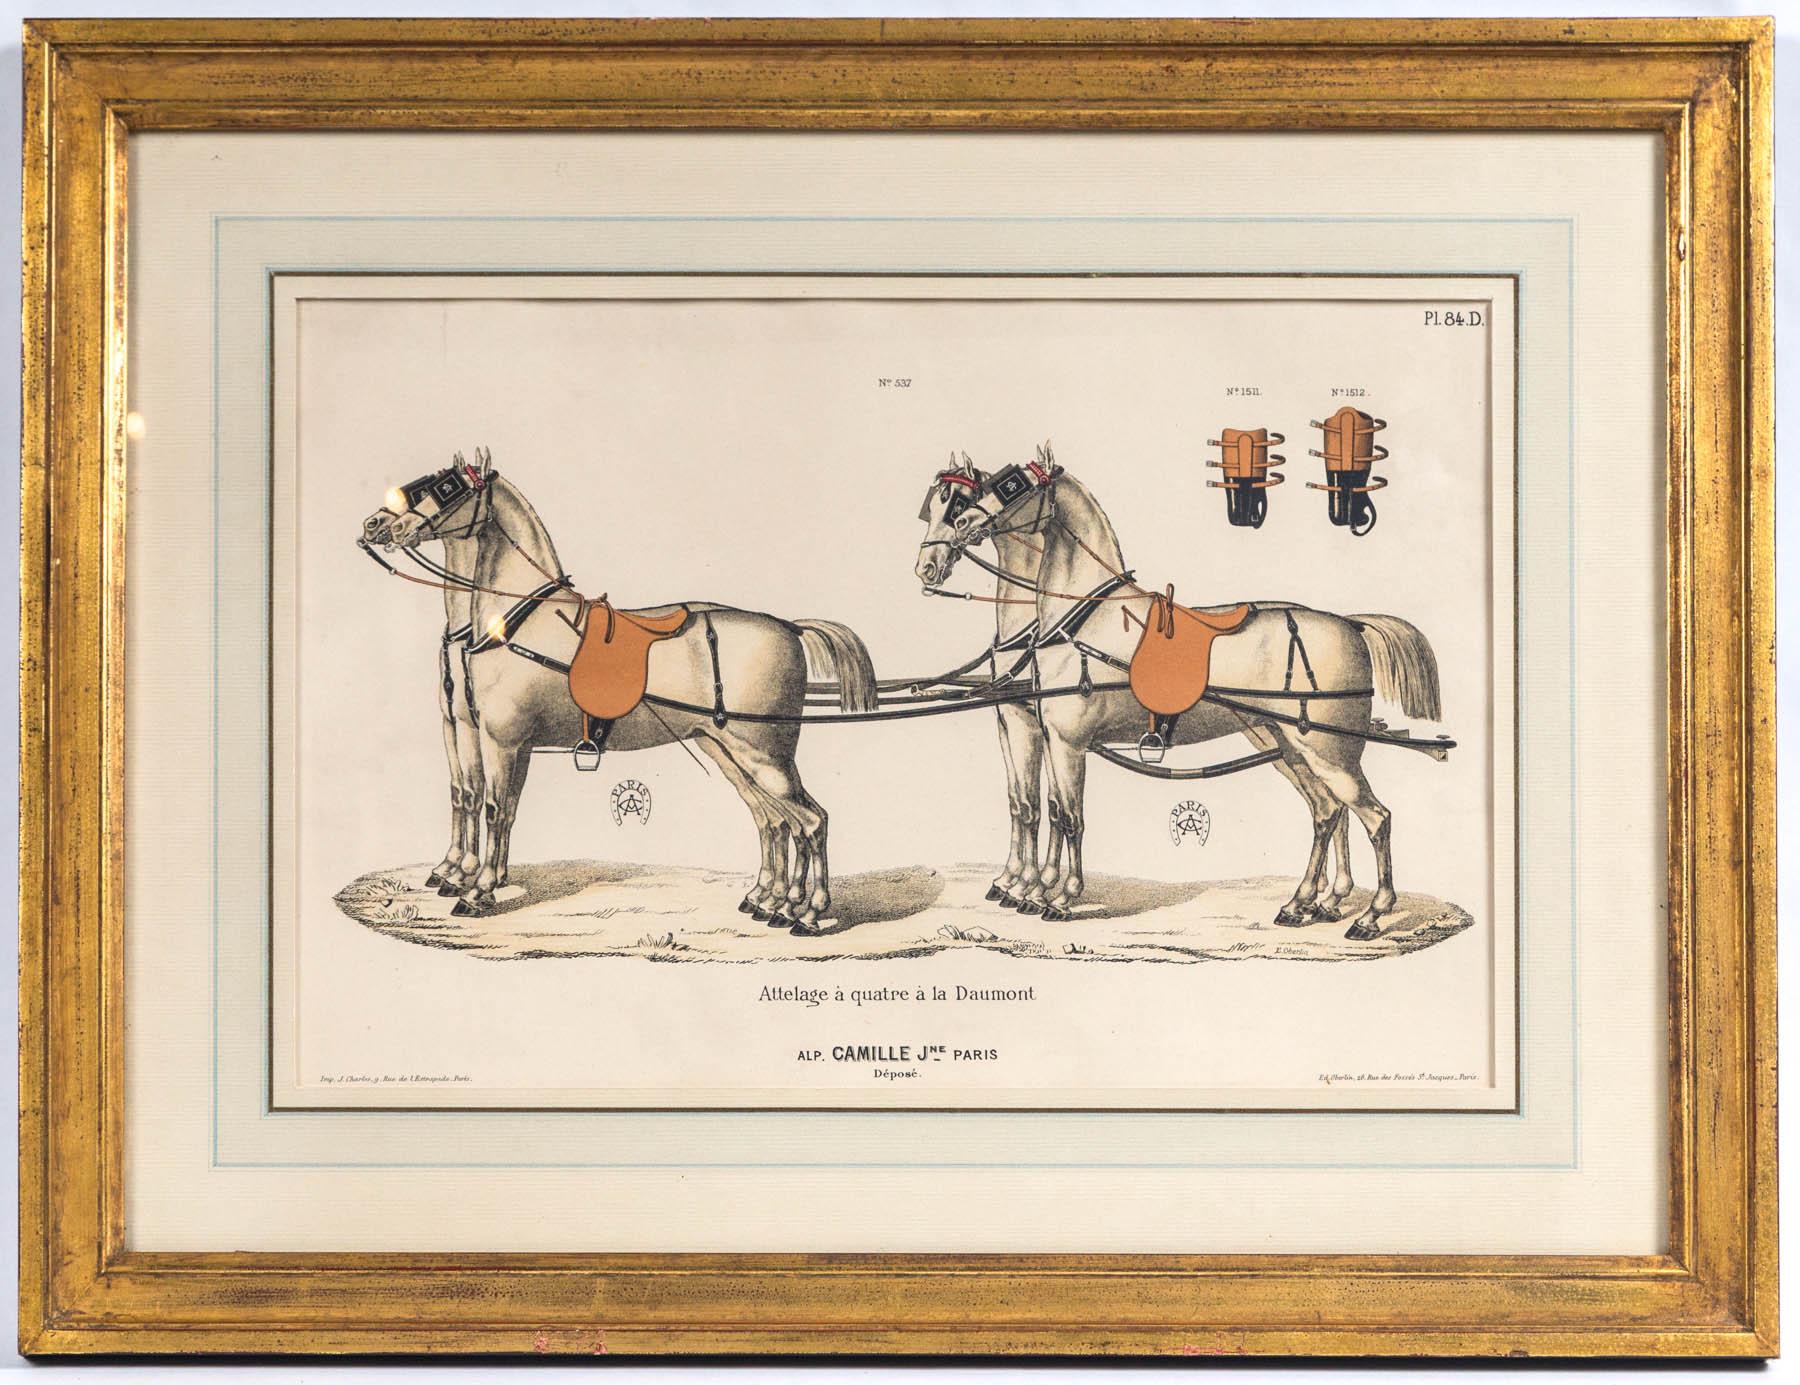 Set of 5 Horse Related Engravings  by Camille & Fils, Paris 3